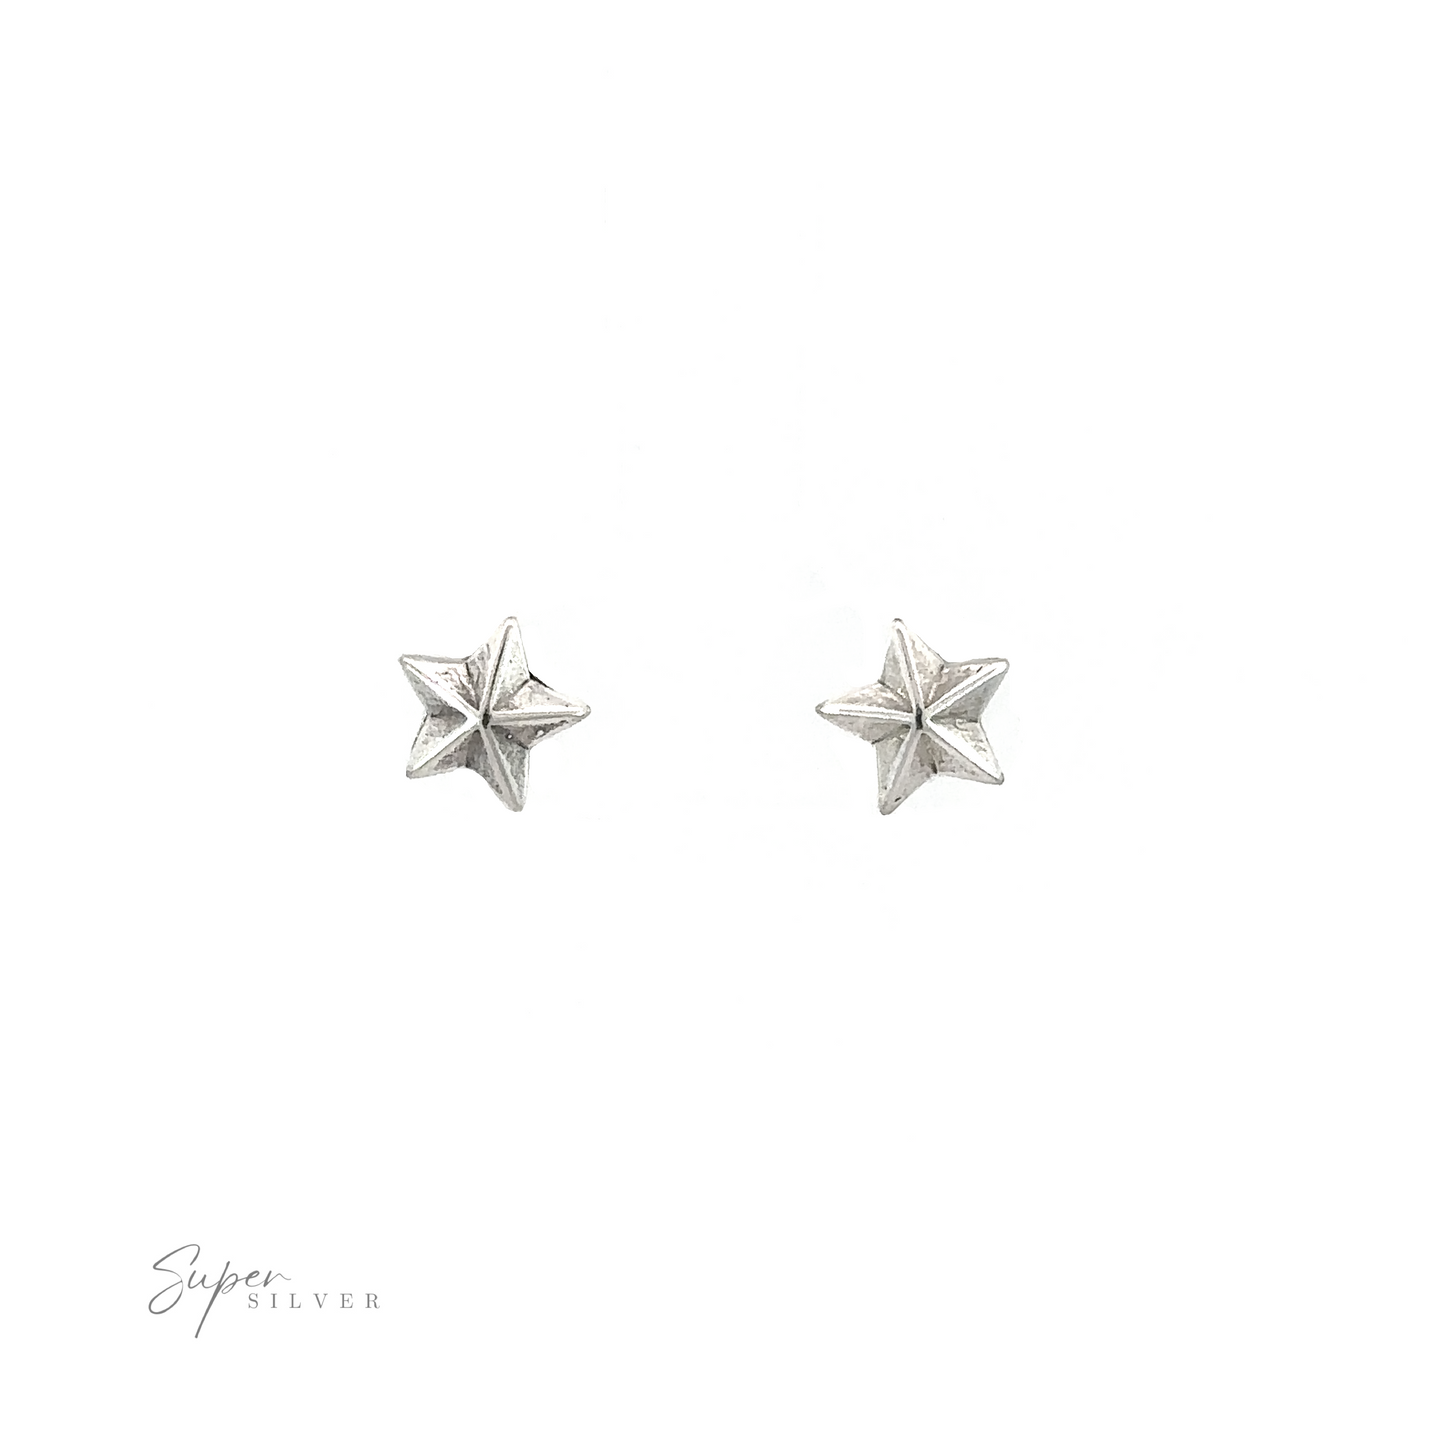 A pair of Star Studs in silver, twinkling on a white background.